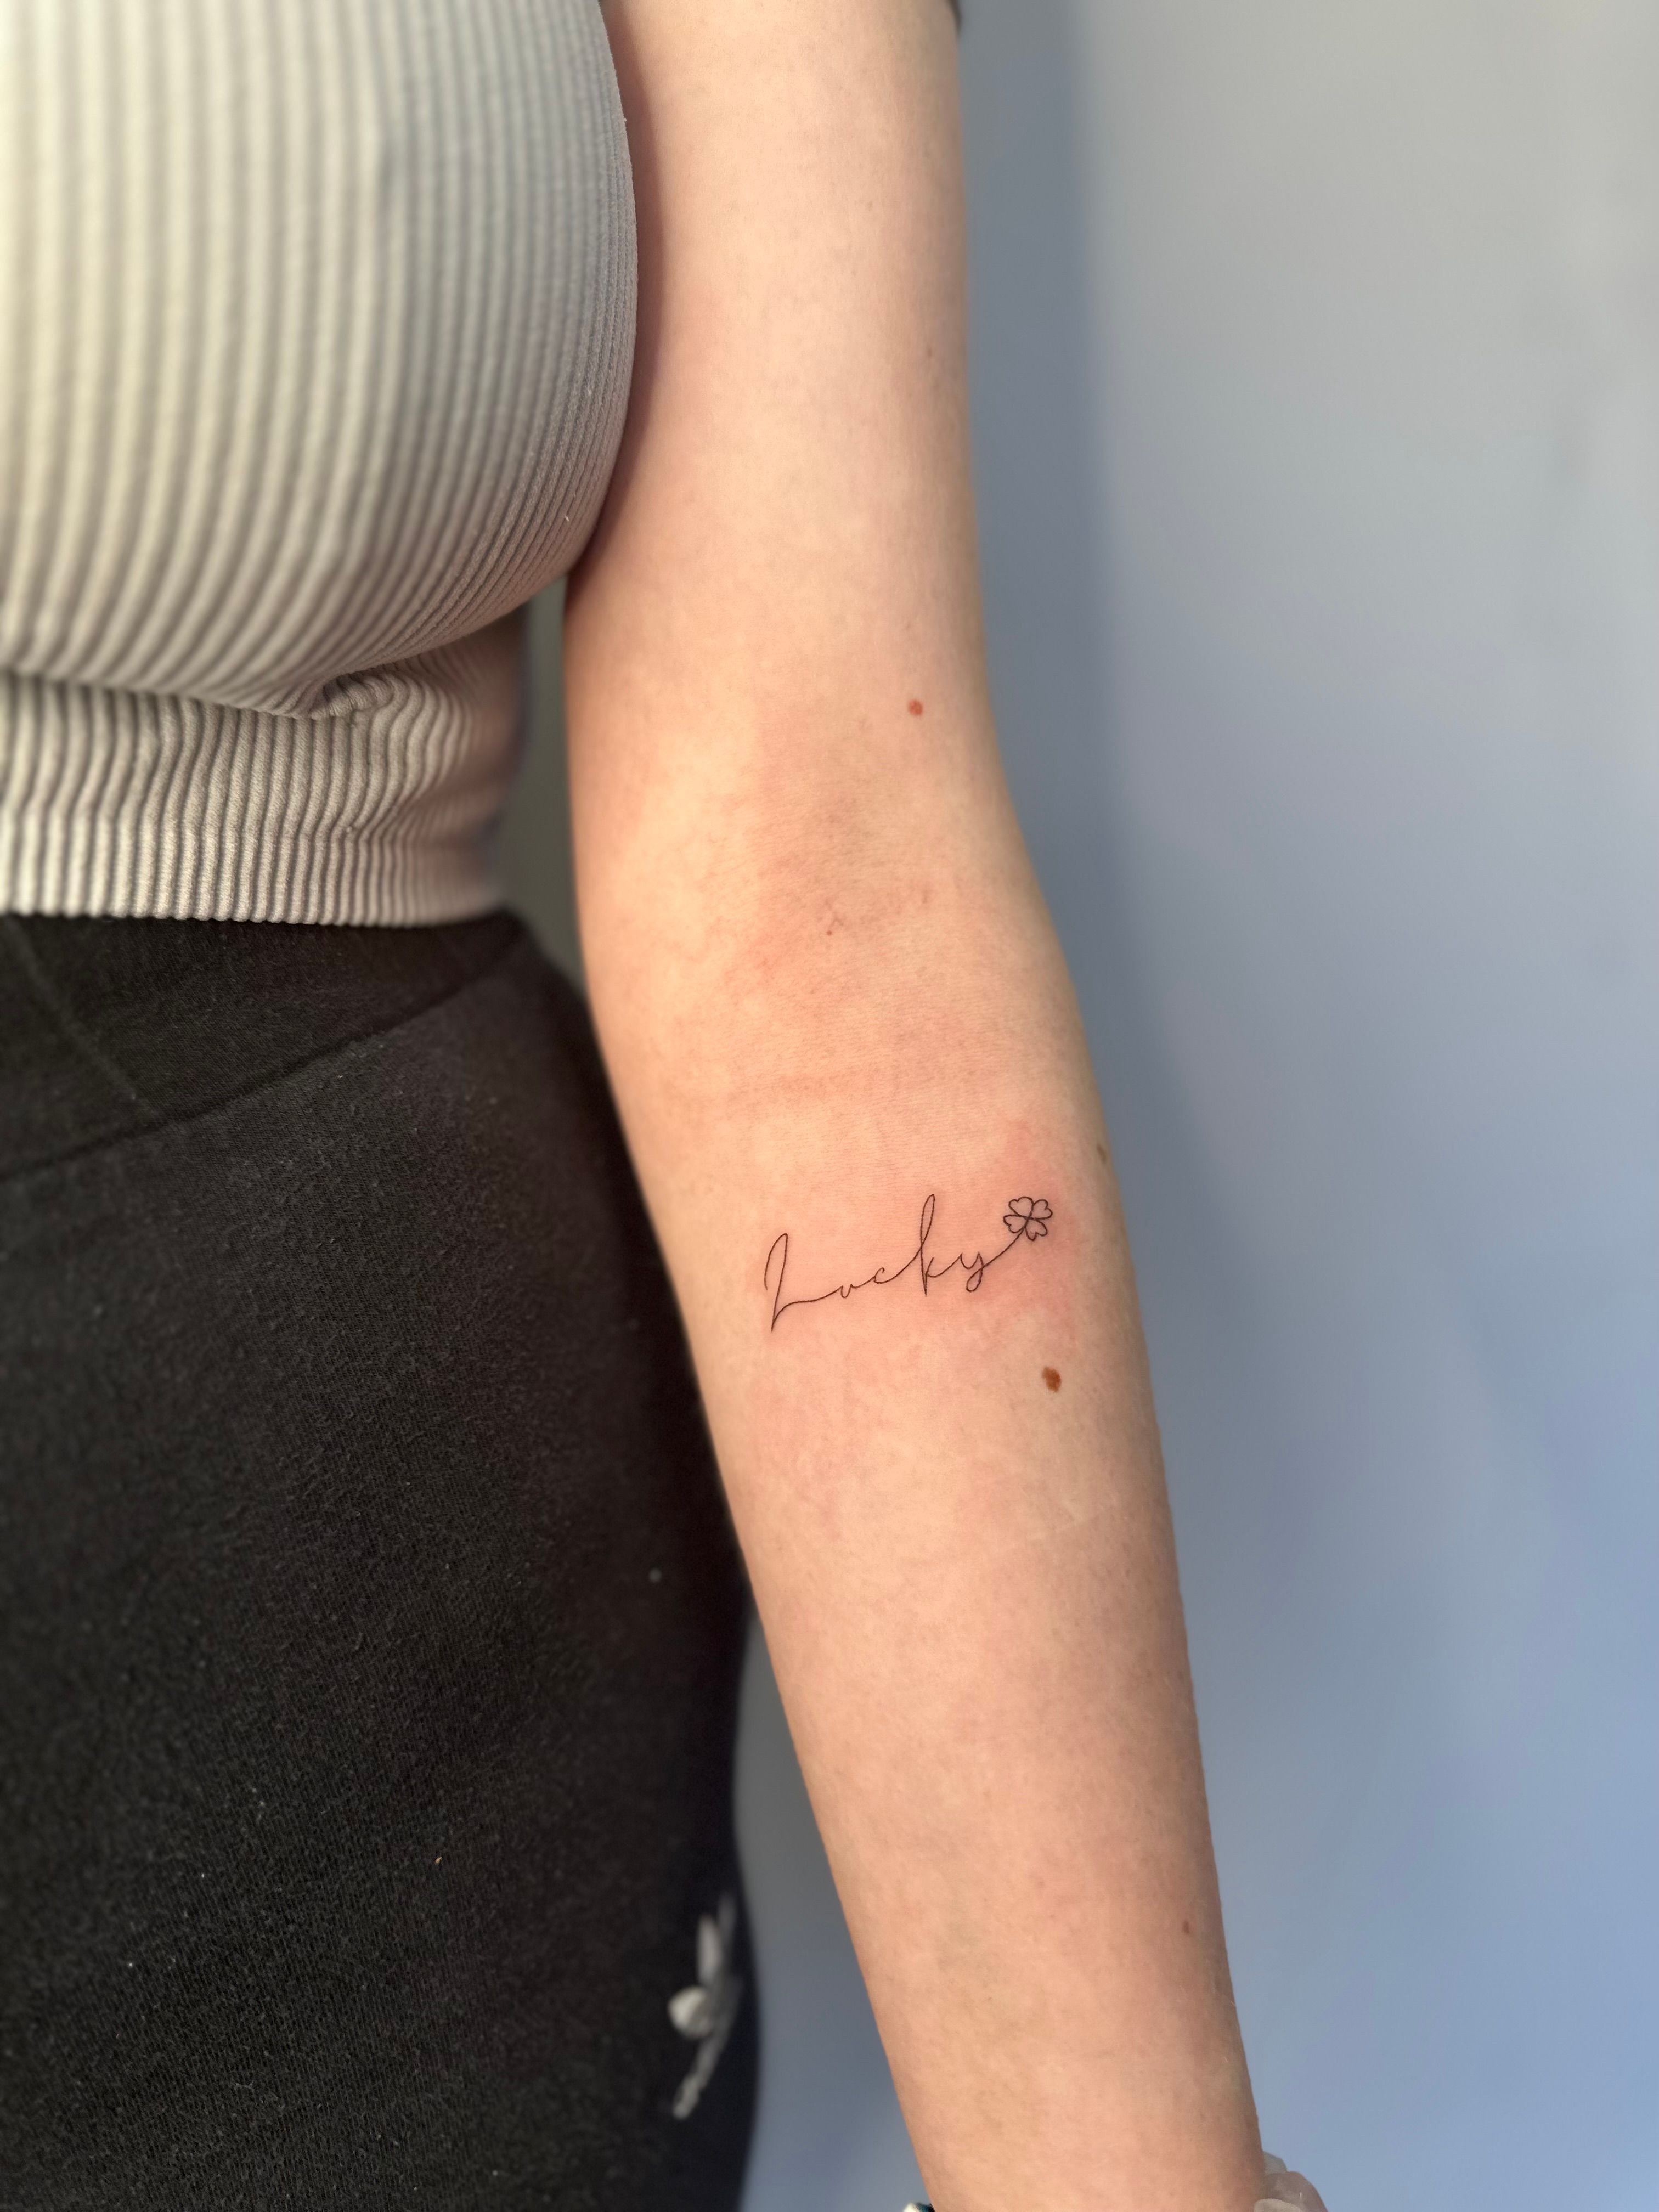 Tiny tattoo, big meaning. As per usual 🤍 Thank you, Christine, for sharing  the final look with me! Your tattoo artist did amazing �... | Instagram